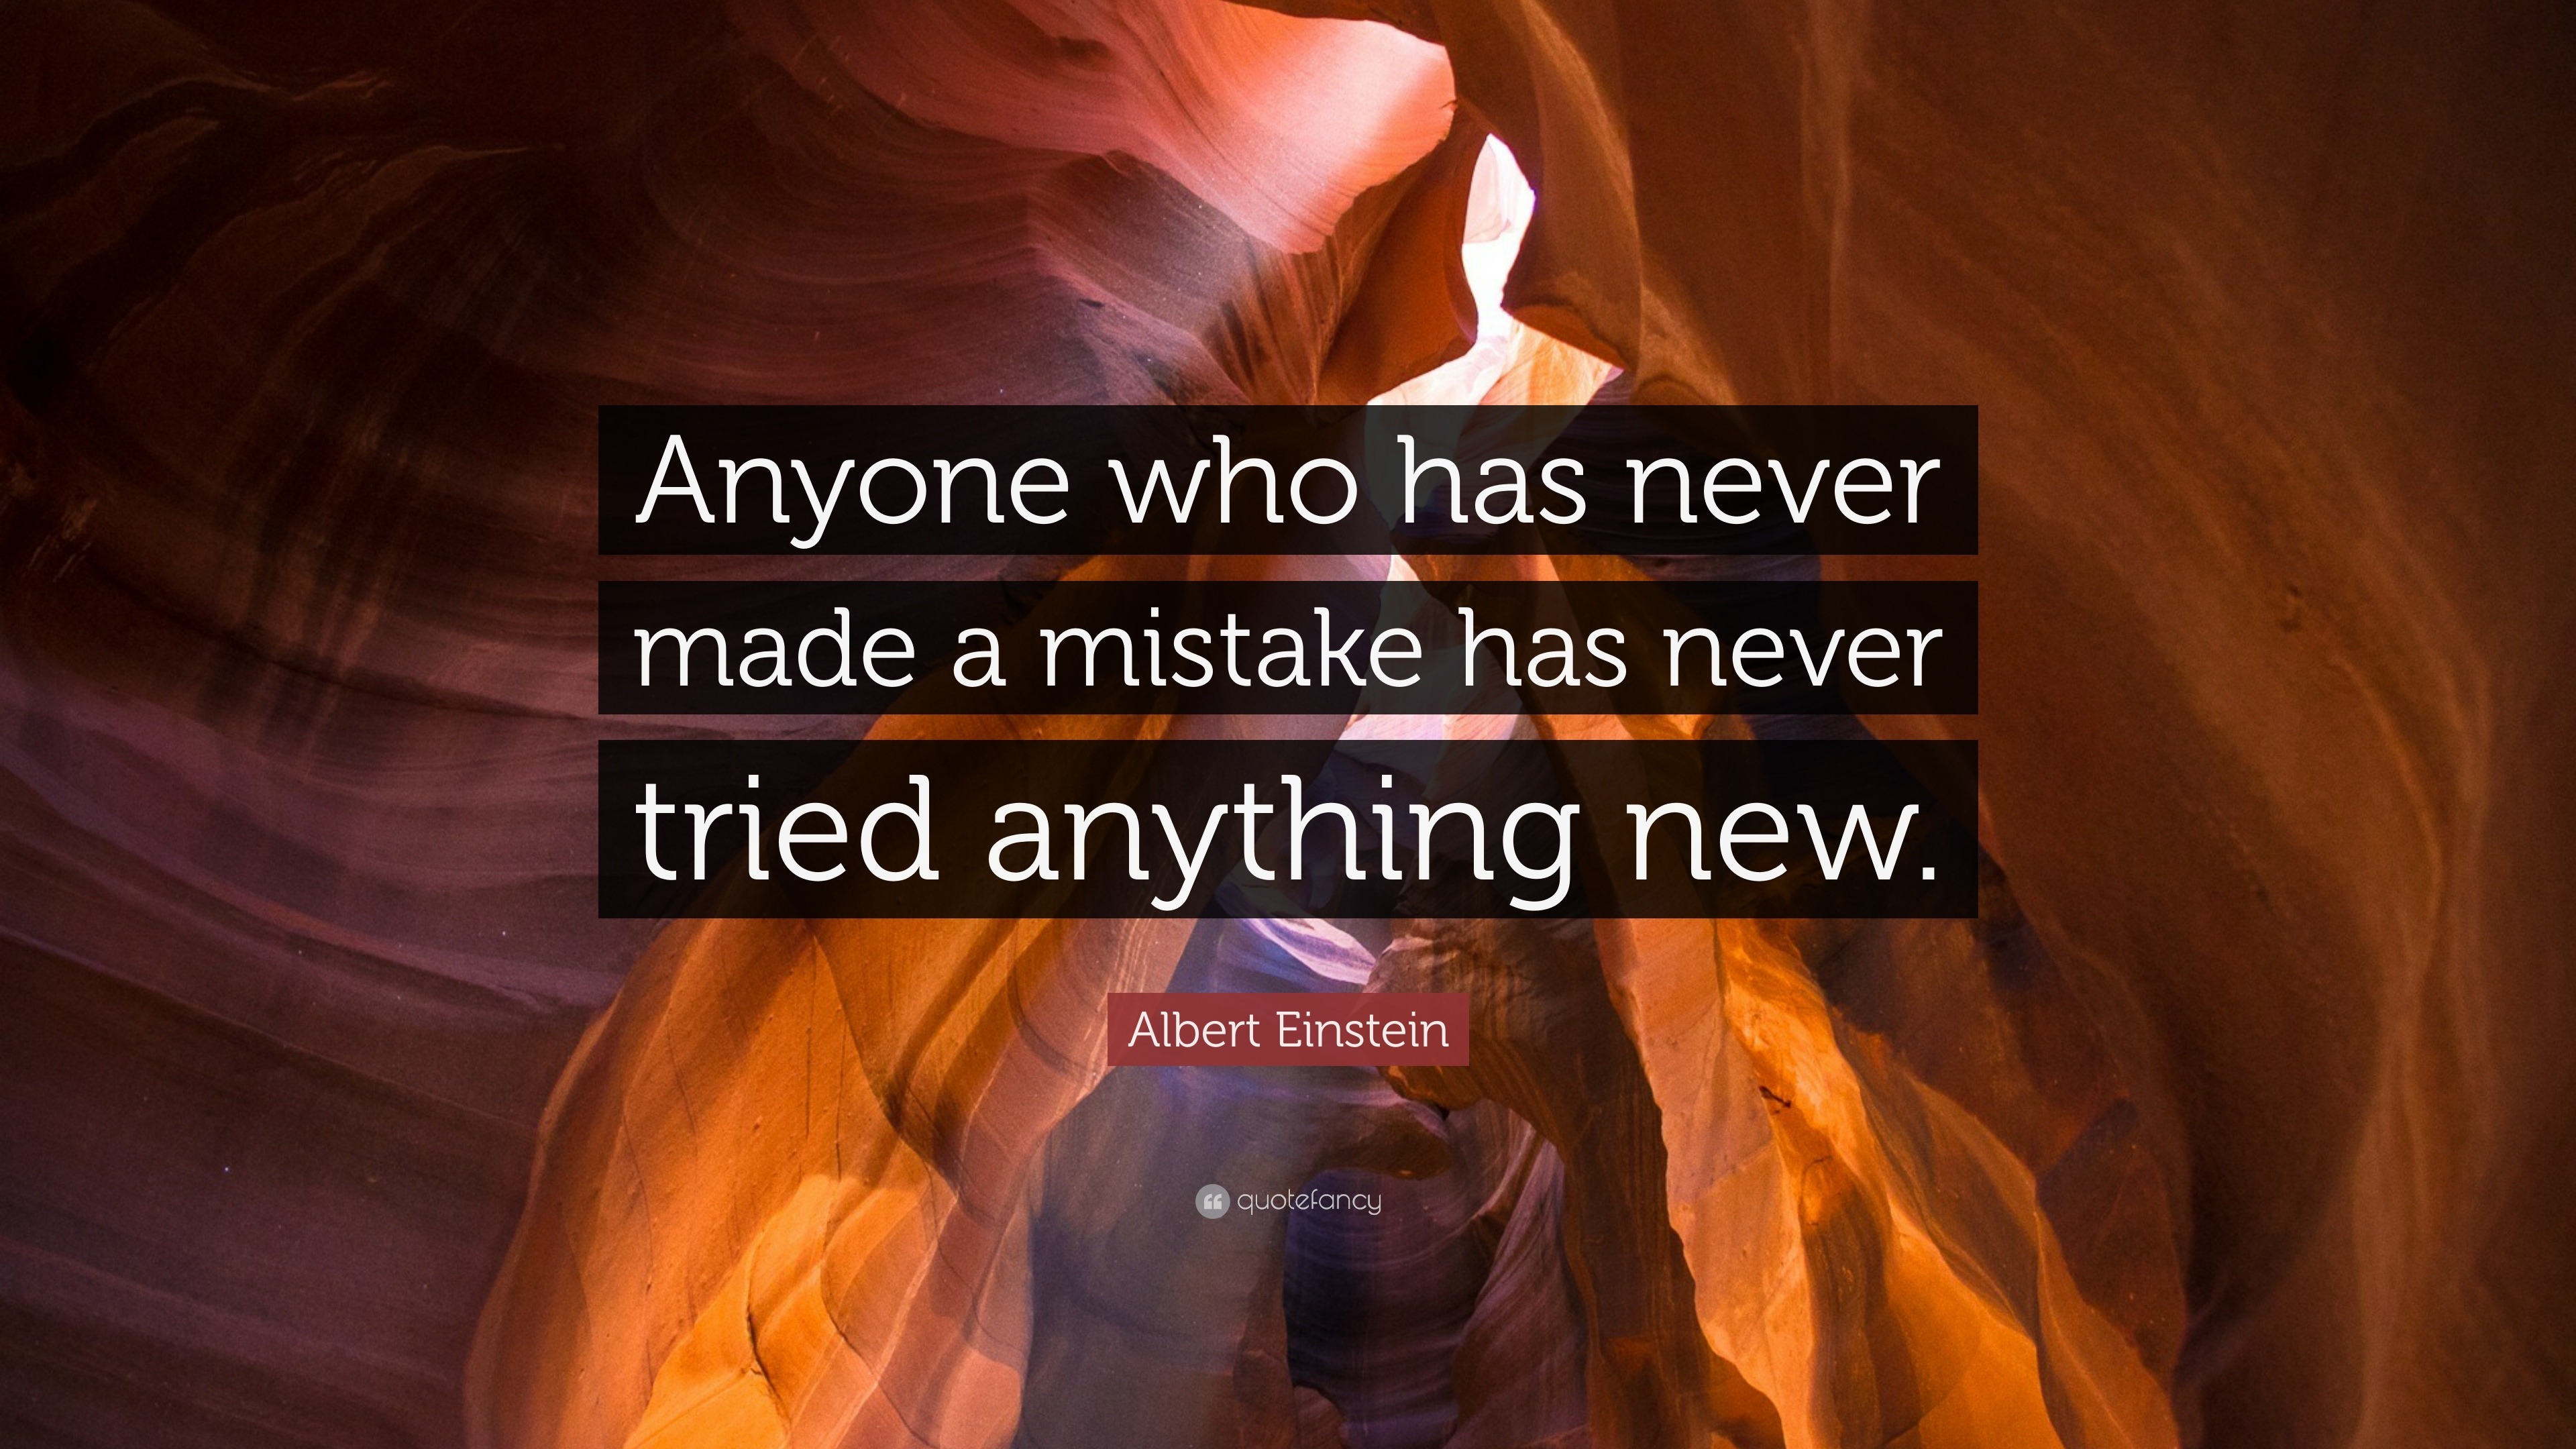 Albert Einstein Quote Anyone Who Has Never Made A Mistake Has Never Tried Anything New